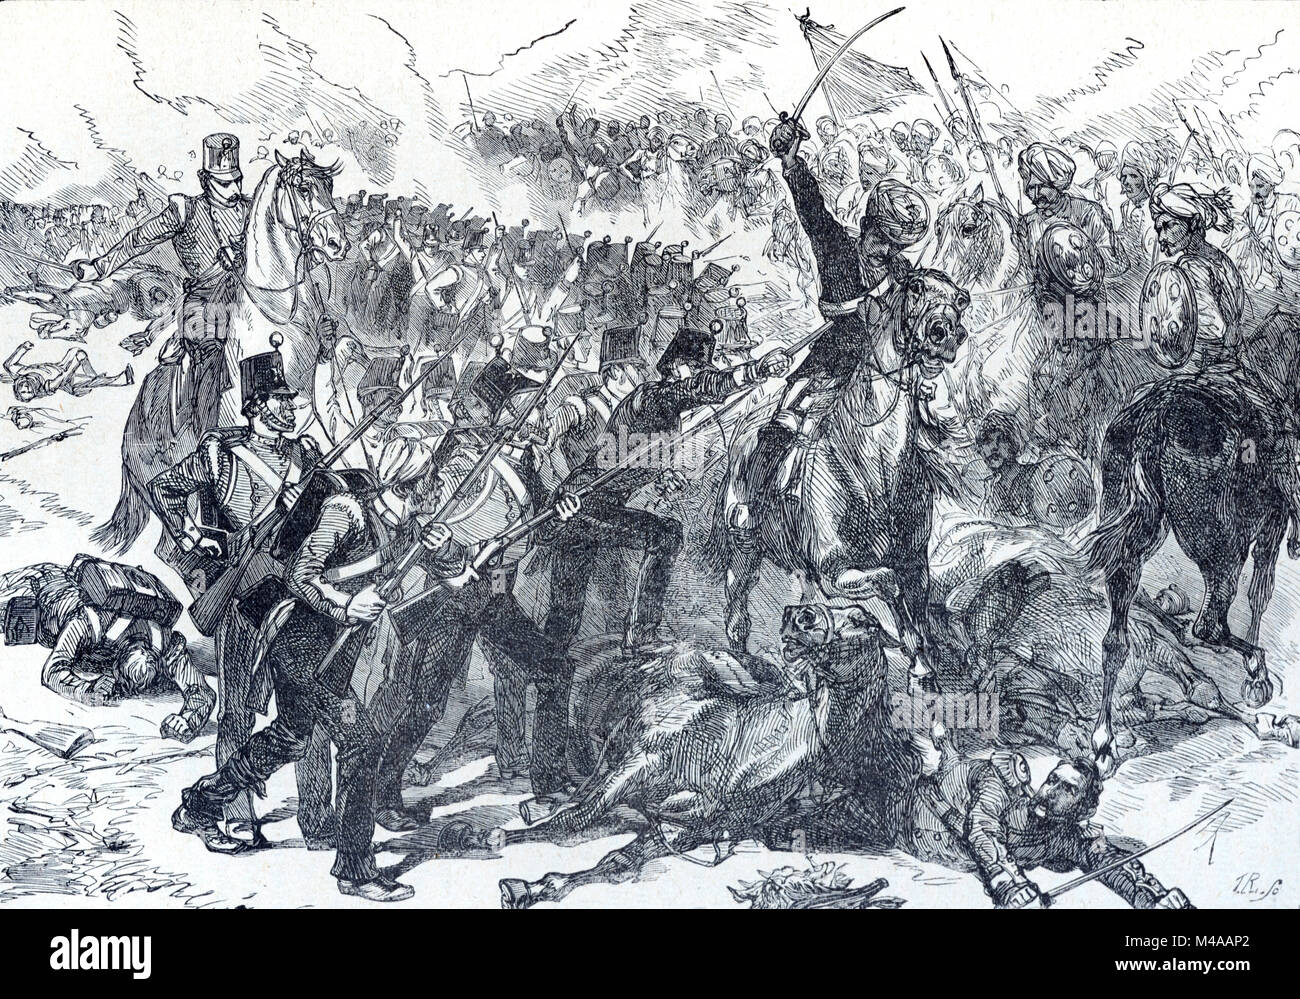 Second Anglo-Afghan War between British Raj & the Emirate of Afghanistan (1878-1880) (Engraving, 1879) Stock Photo